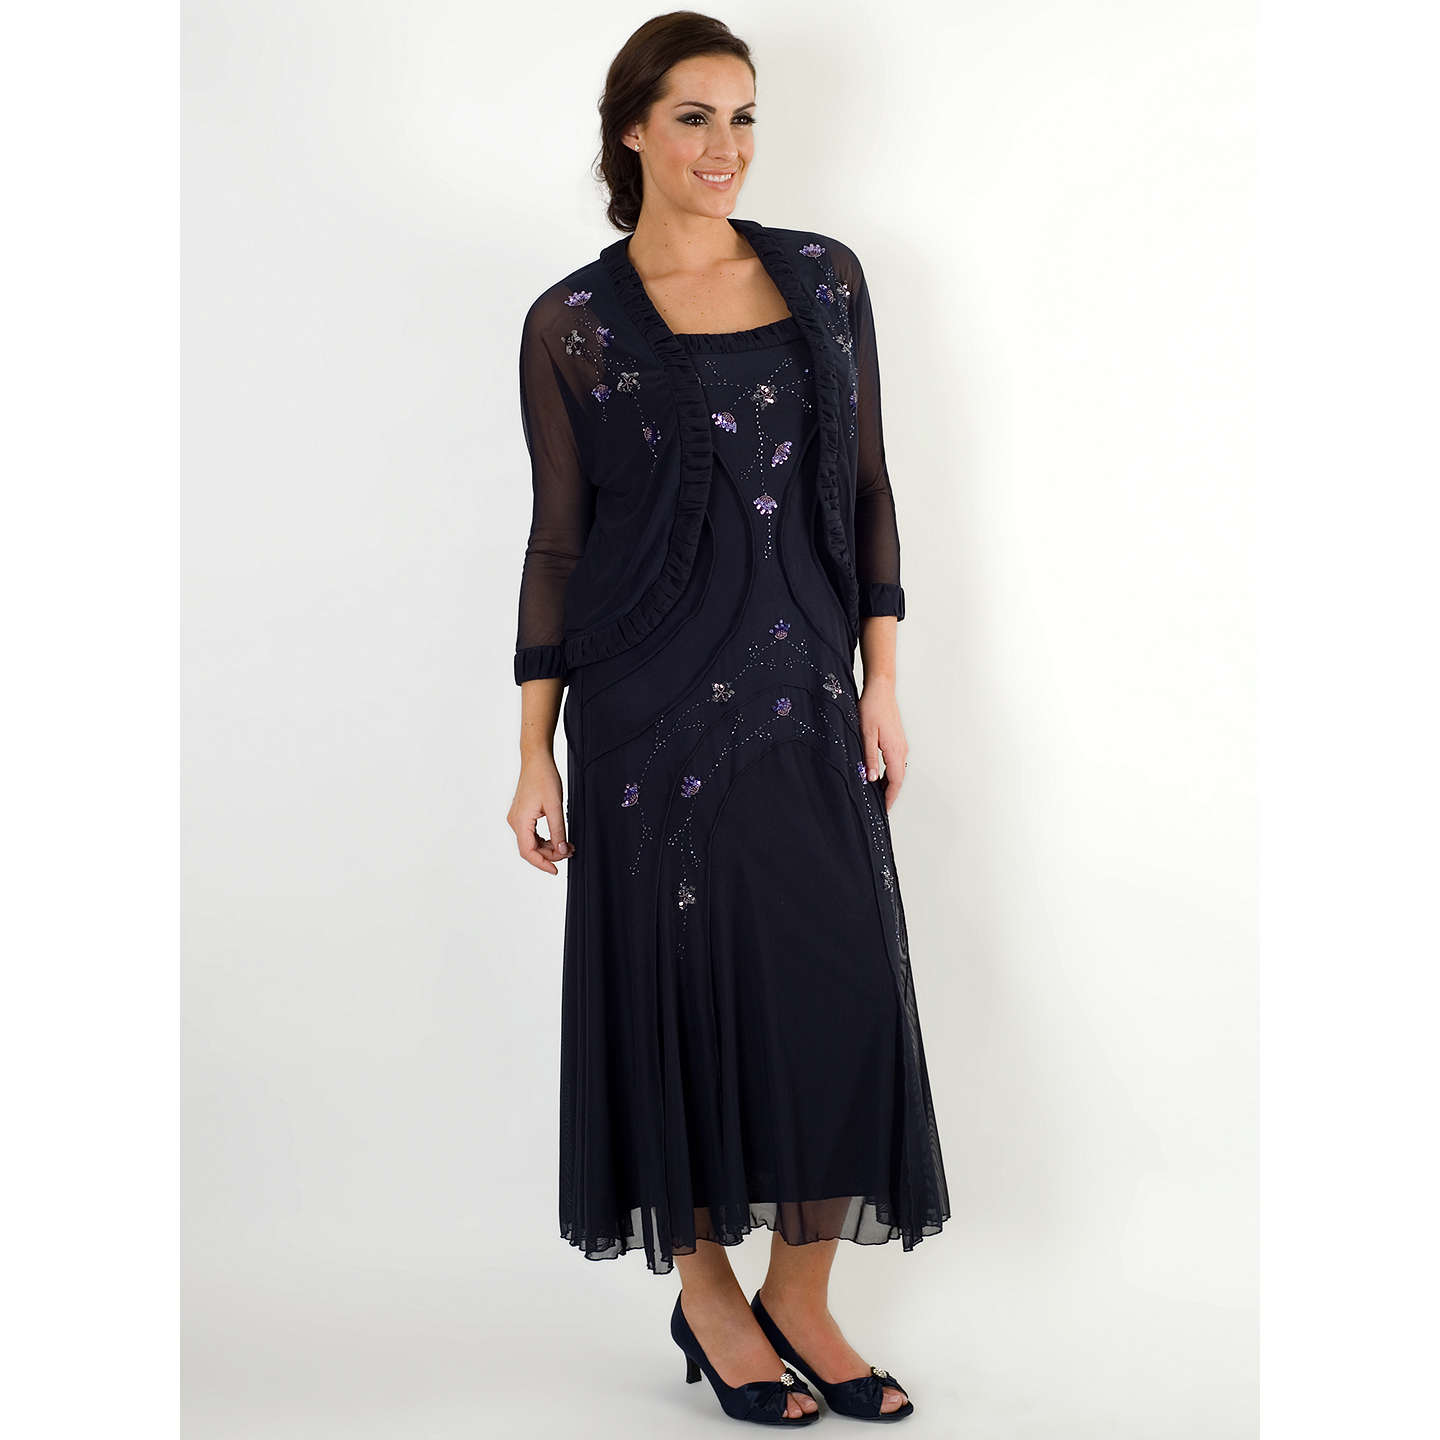 Chesca Ruched Trim Bead Mesh Dress, Navy at John Lewis